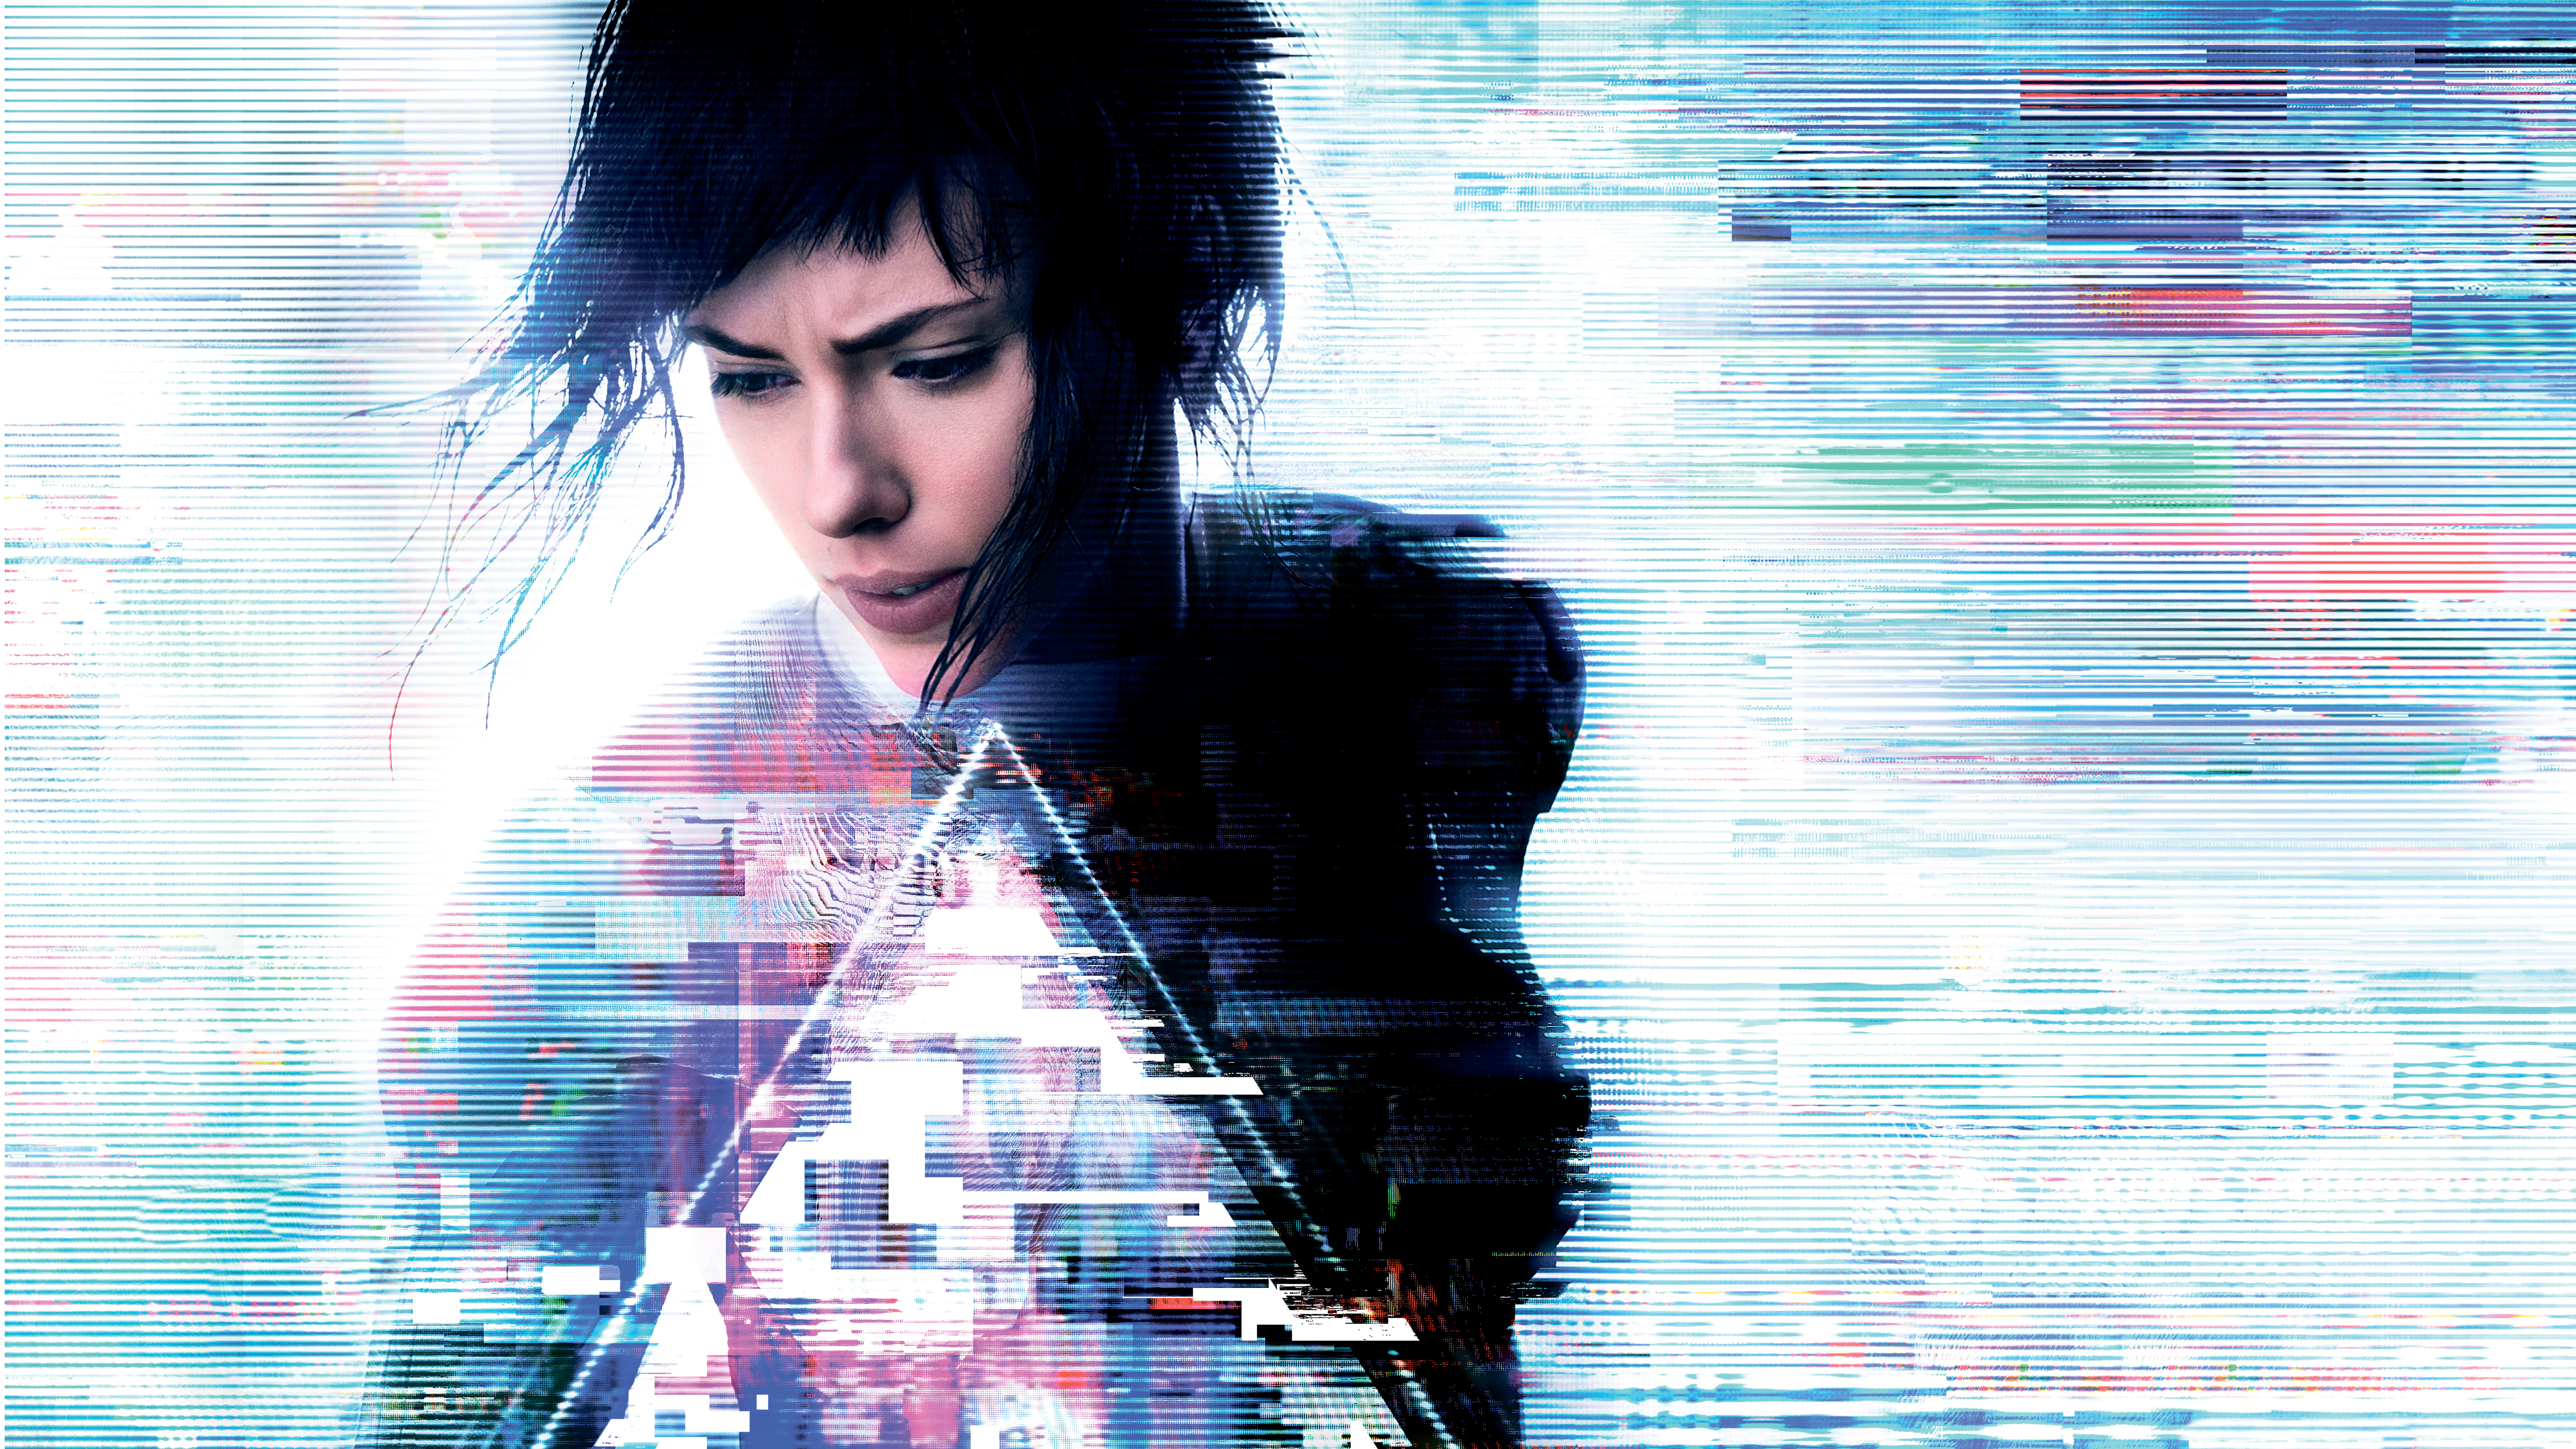 Ghost in the Shell Скарлет обои